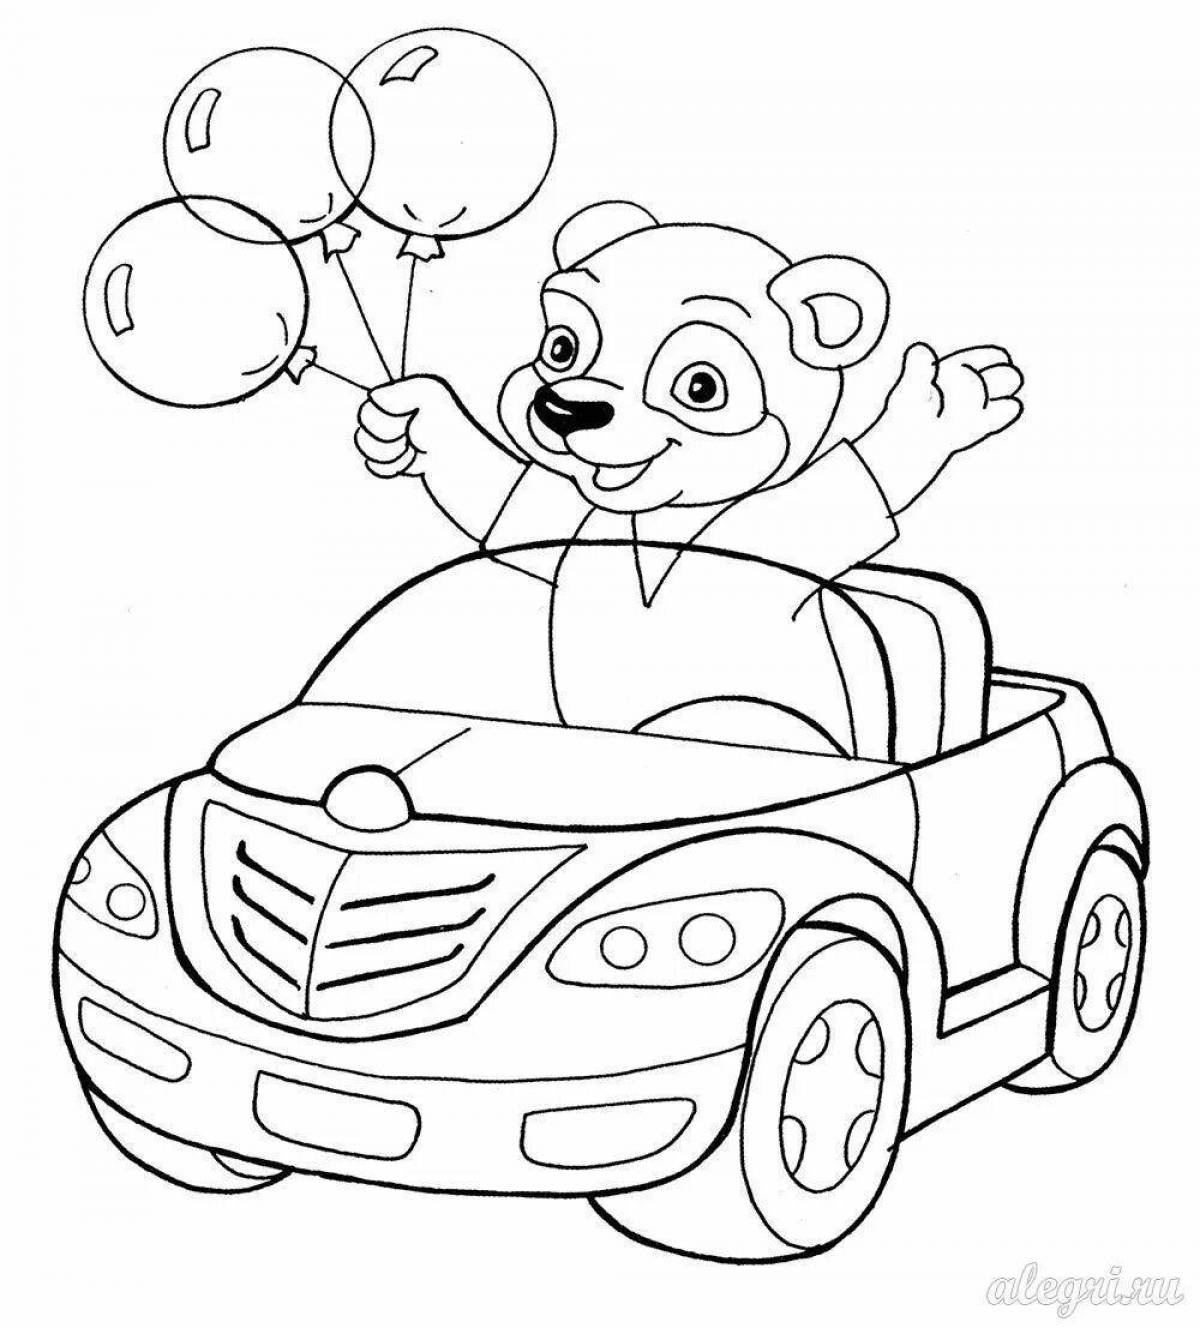 Fun coloring for girls 5-6 years old